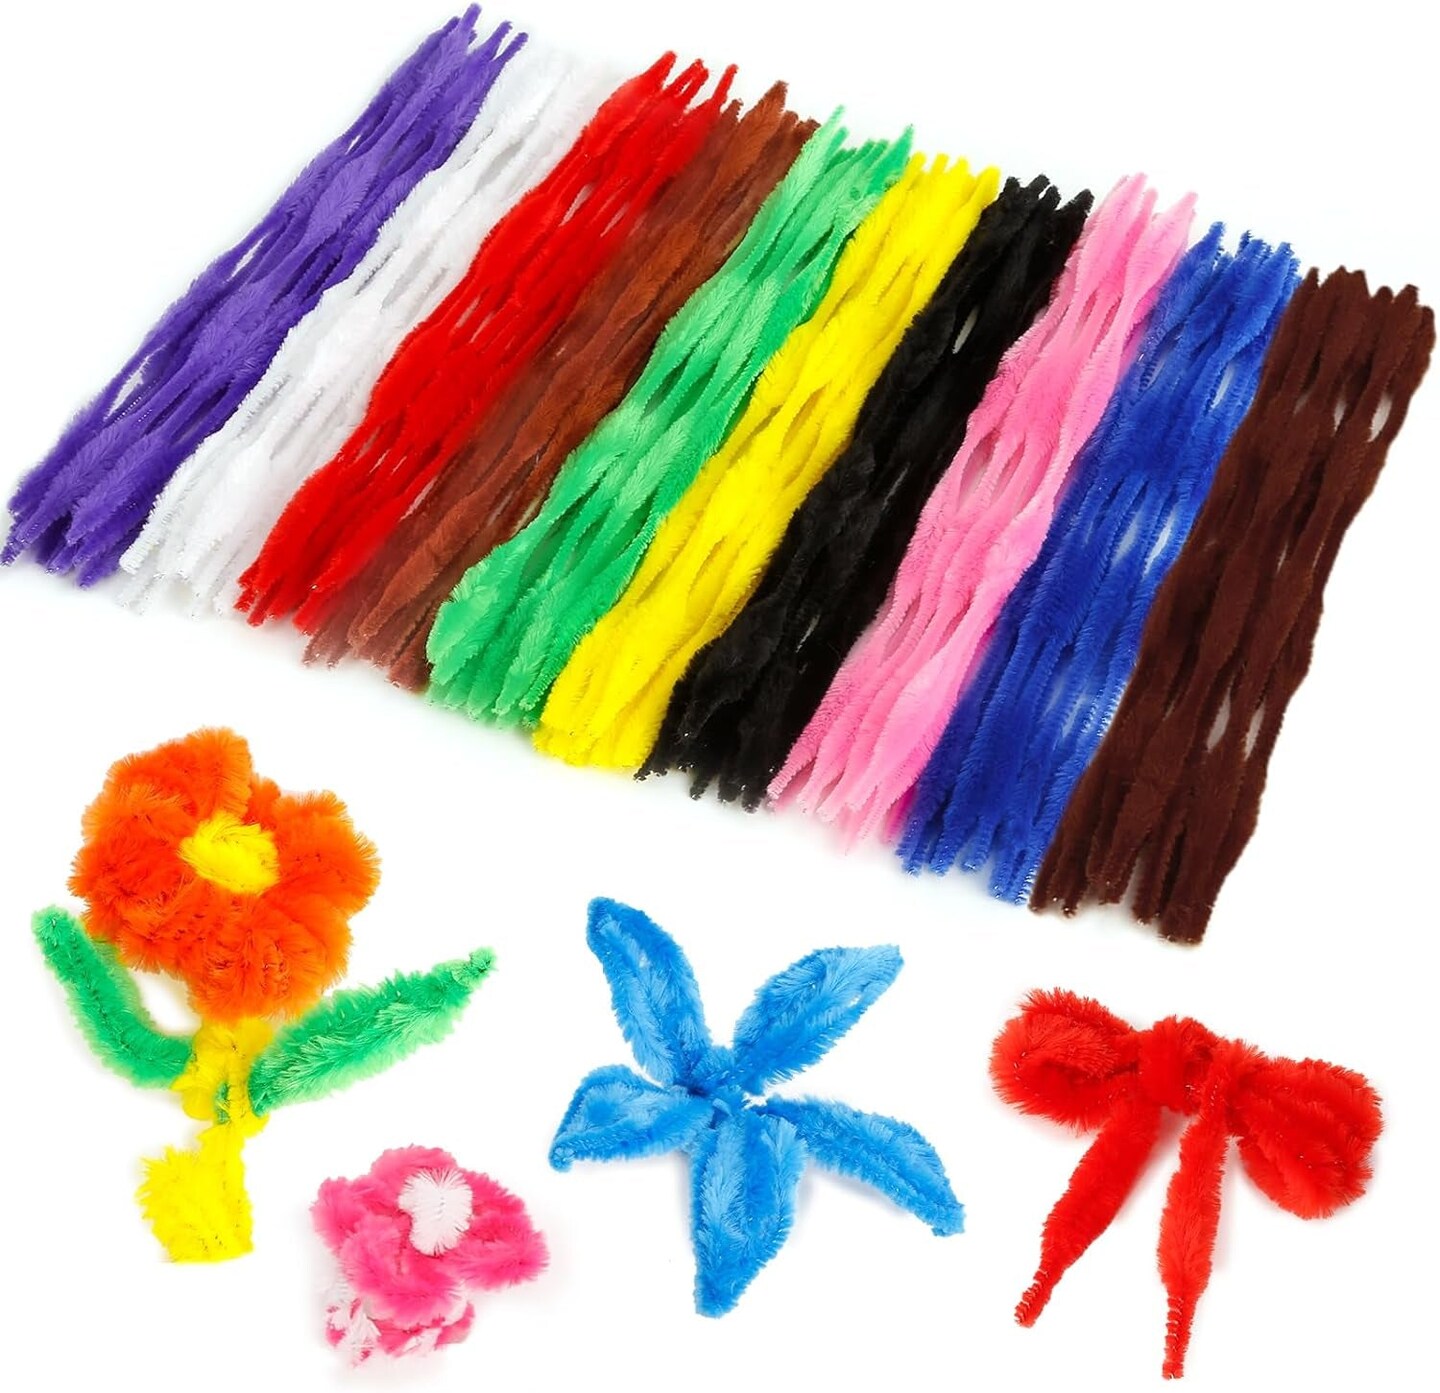 100pcs Brown Chenille Stems, Pipe Cleaners, Diy Craft Toy With